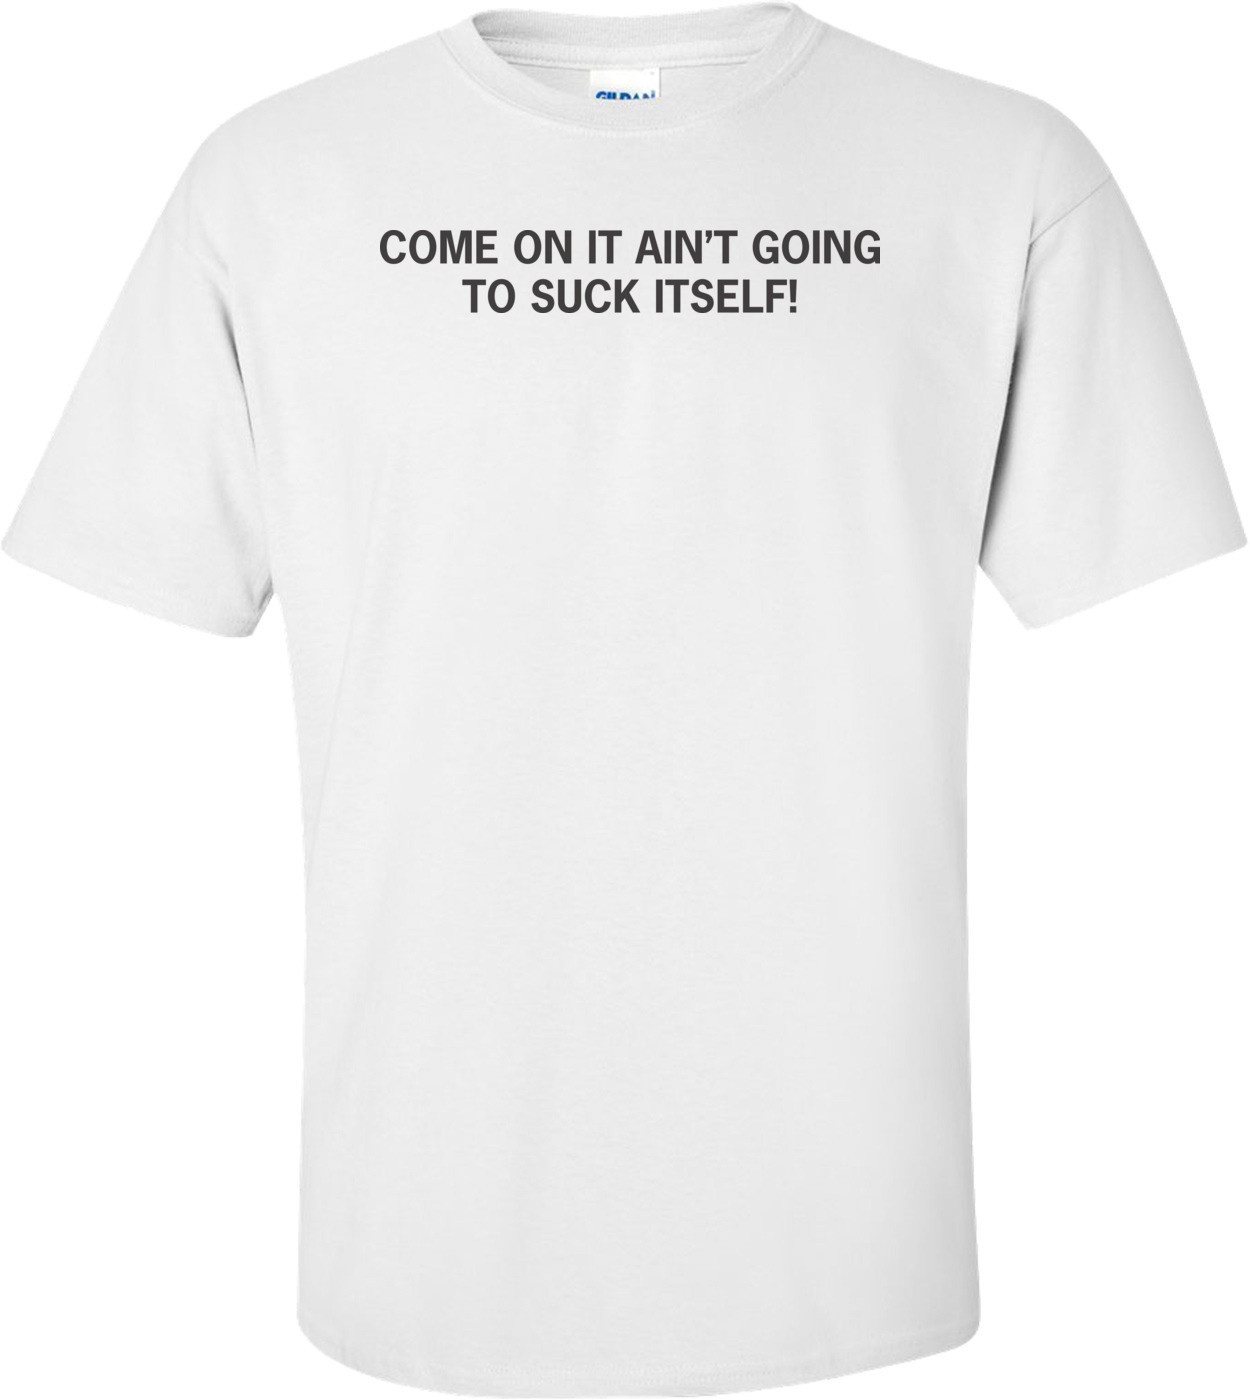 Come On It Ain't Going To Suck Itself T-shirt